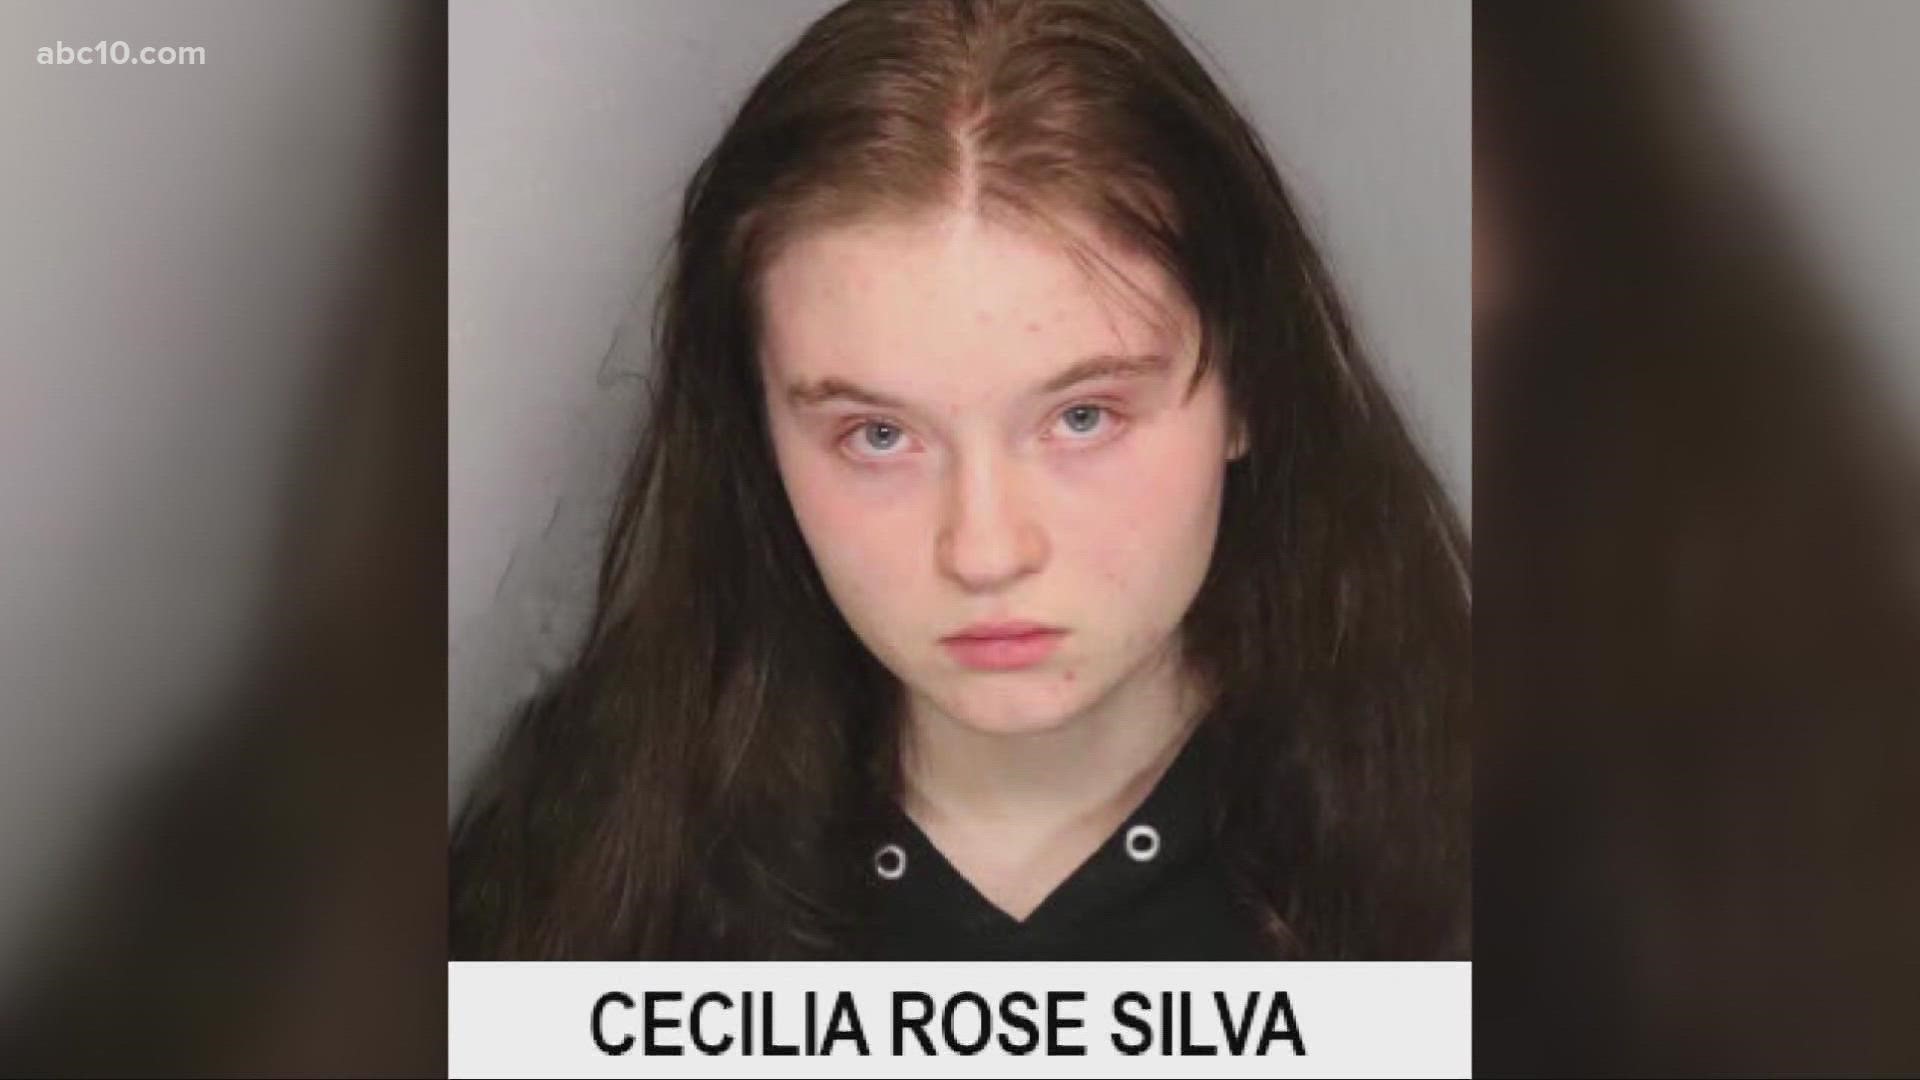 An 18-year-old woman from Sacramento was arraigned on multiple charges in connection with the death of a 14-year-old in Lodi.